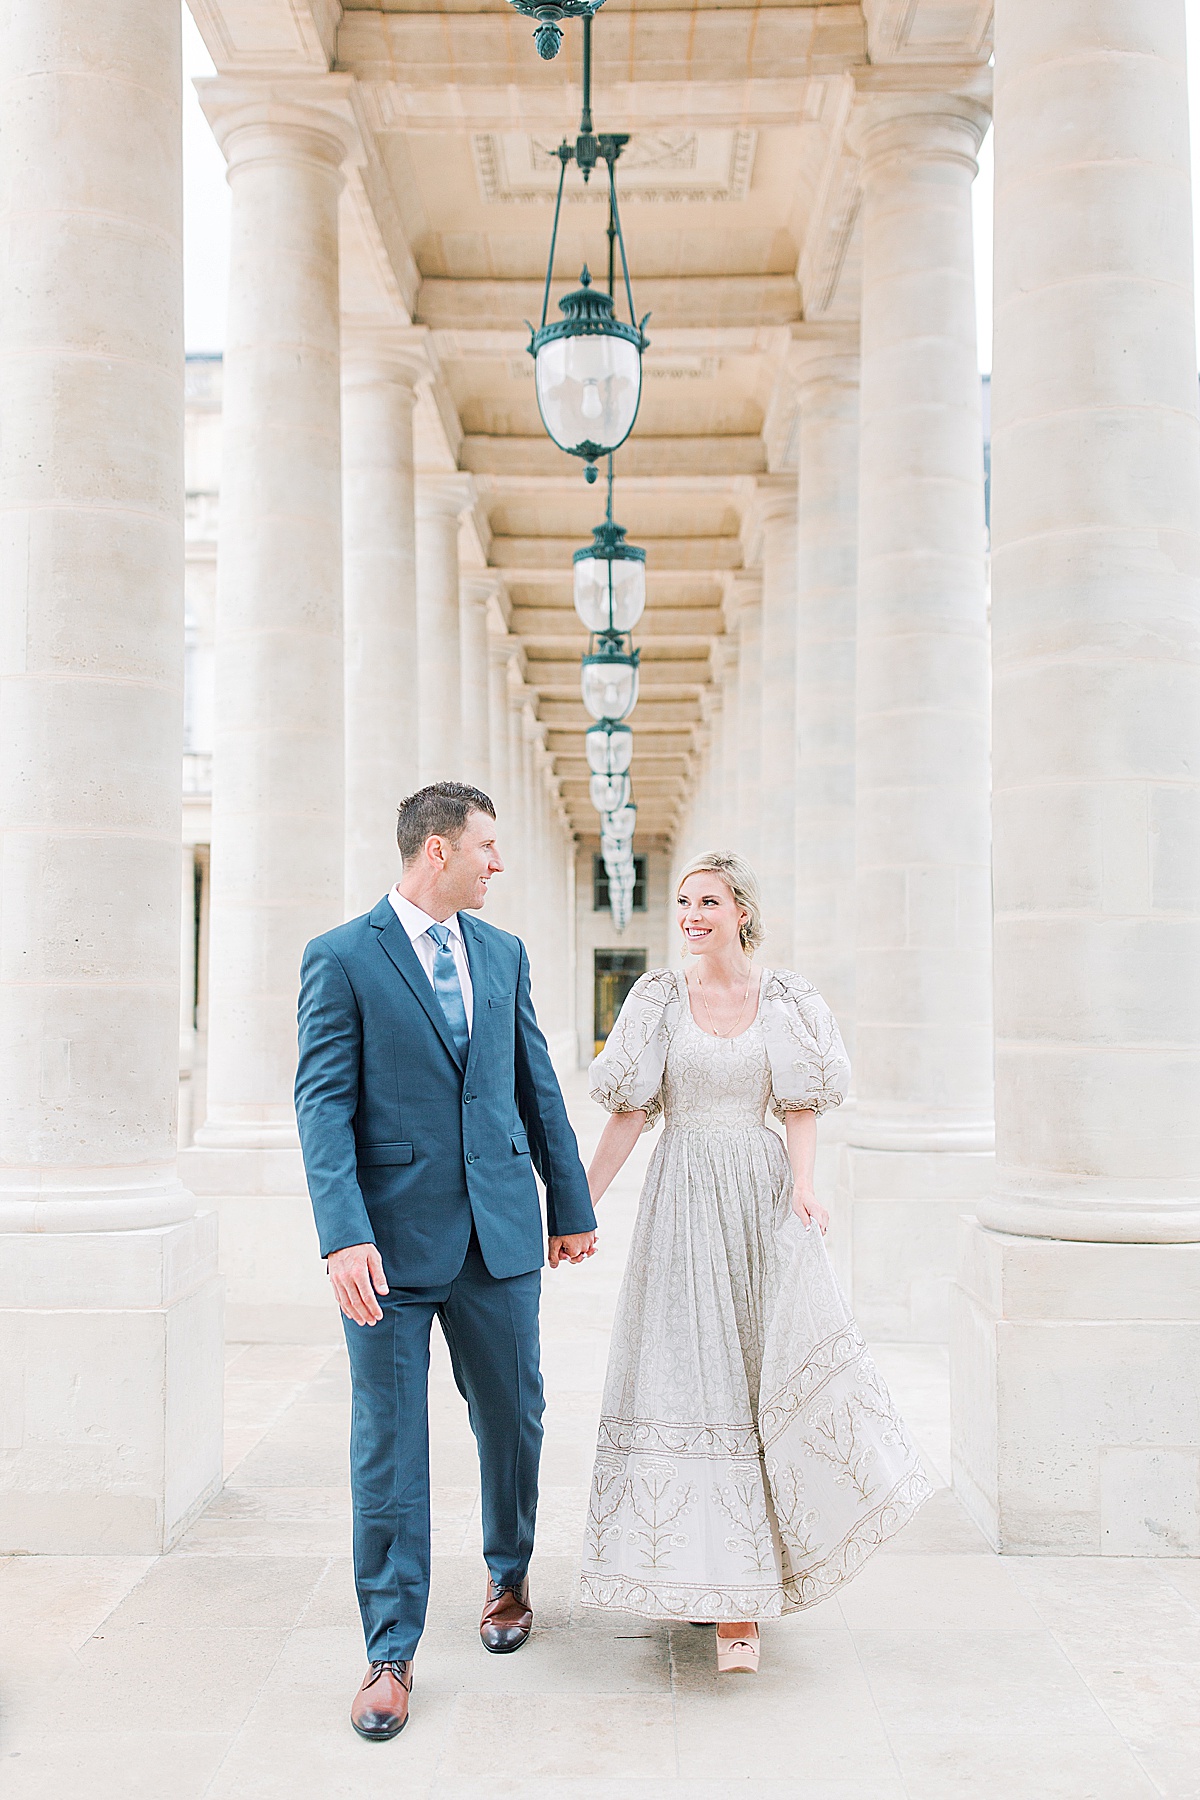 Palais Royal Engagement Couple Smiling at Each other Walking in Between Columns Photo